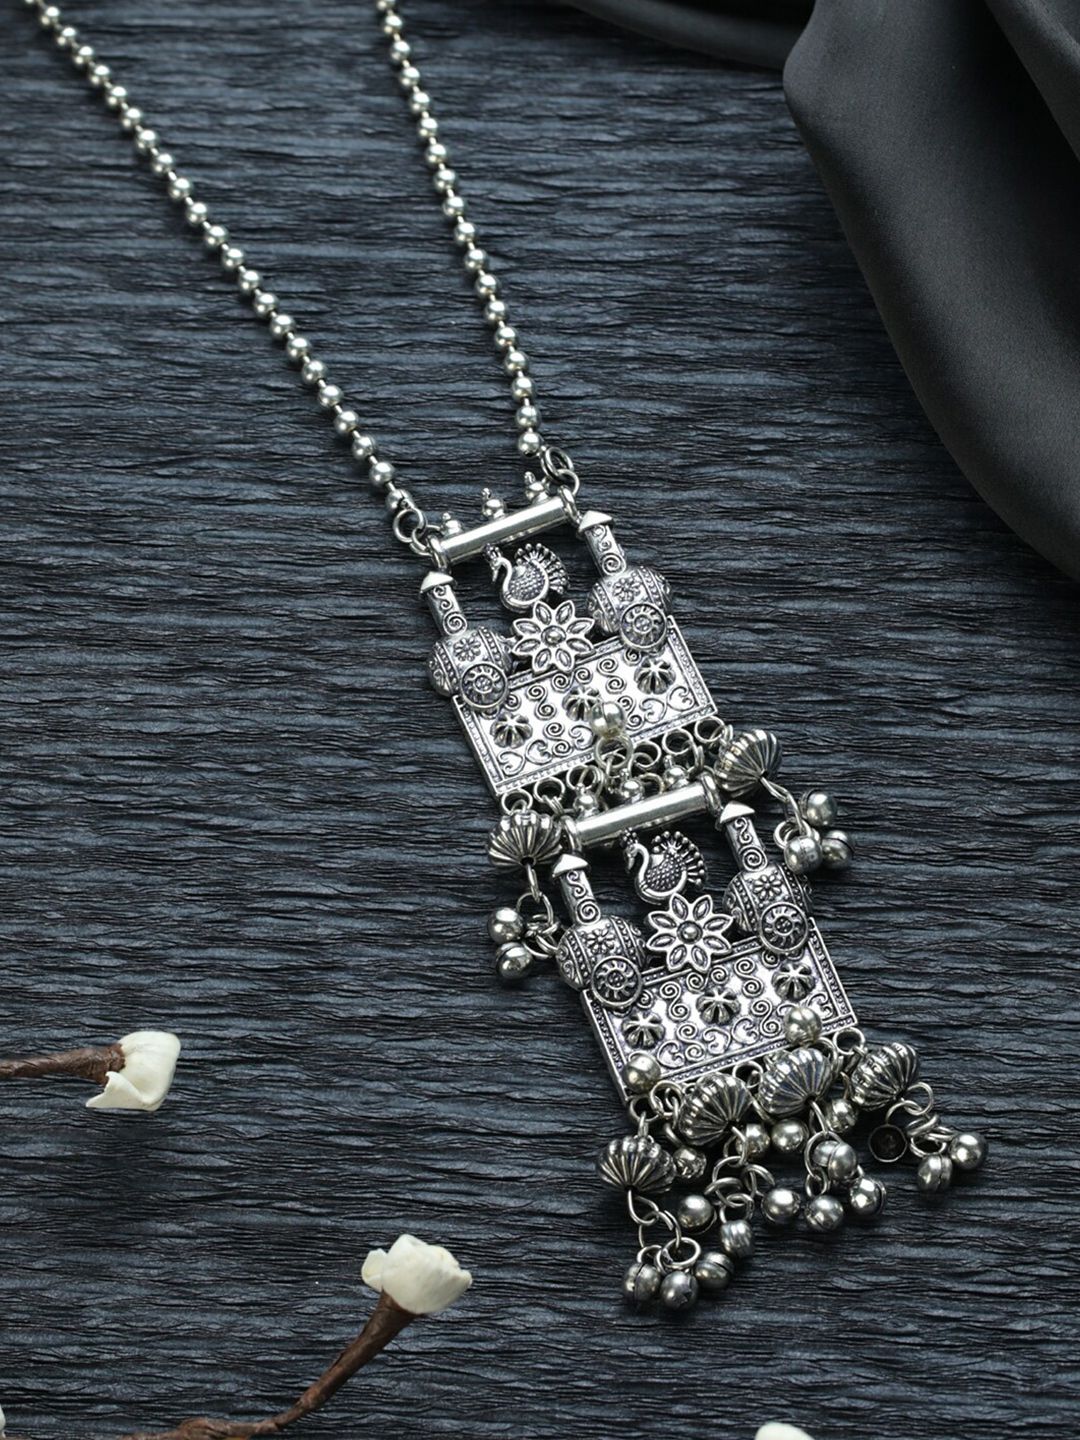 Priyaasi Silver-Plated Oxidised Necklace Price in India